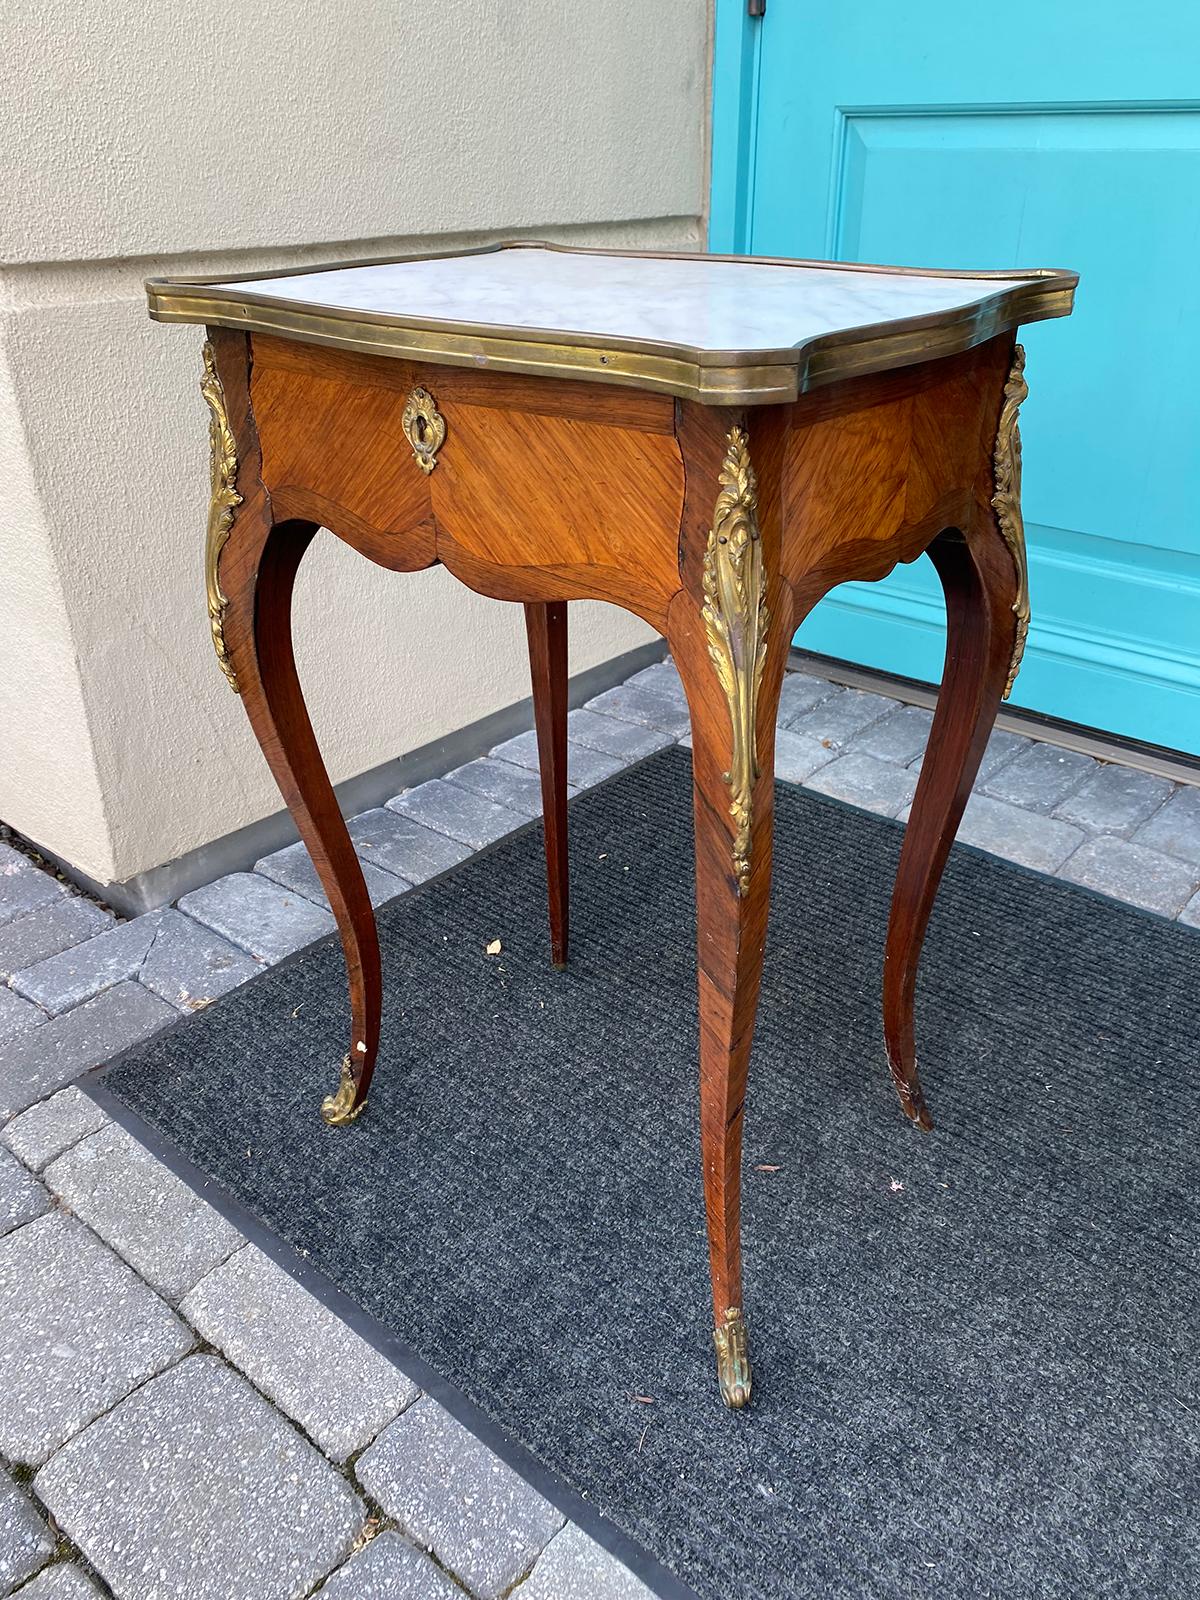 19th Century French Ormolu Mounted Marble Top Side Table, 1 Drawer In Good Condition For Sale In Atlanta, GA